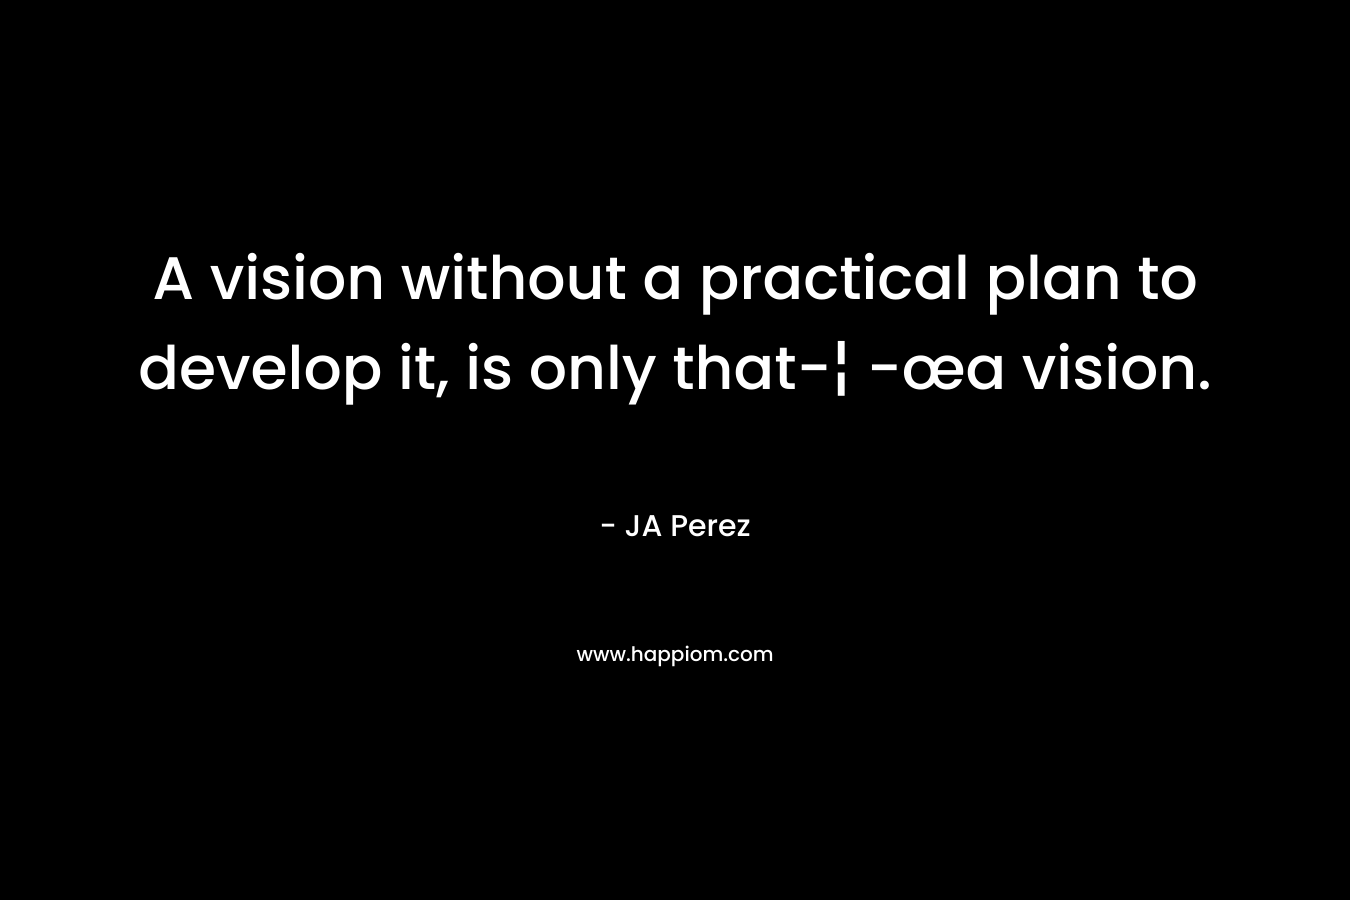 A vision without a practical plan to develop it, is only that-¦ -œa vision. – JA Perez